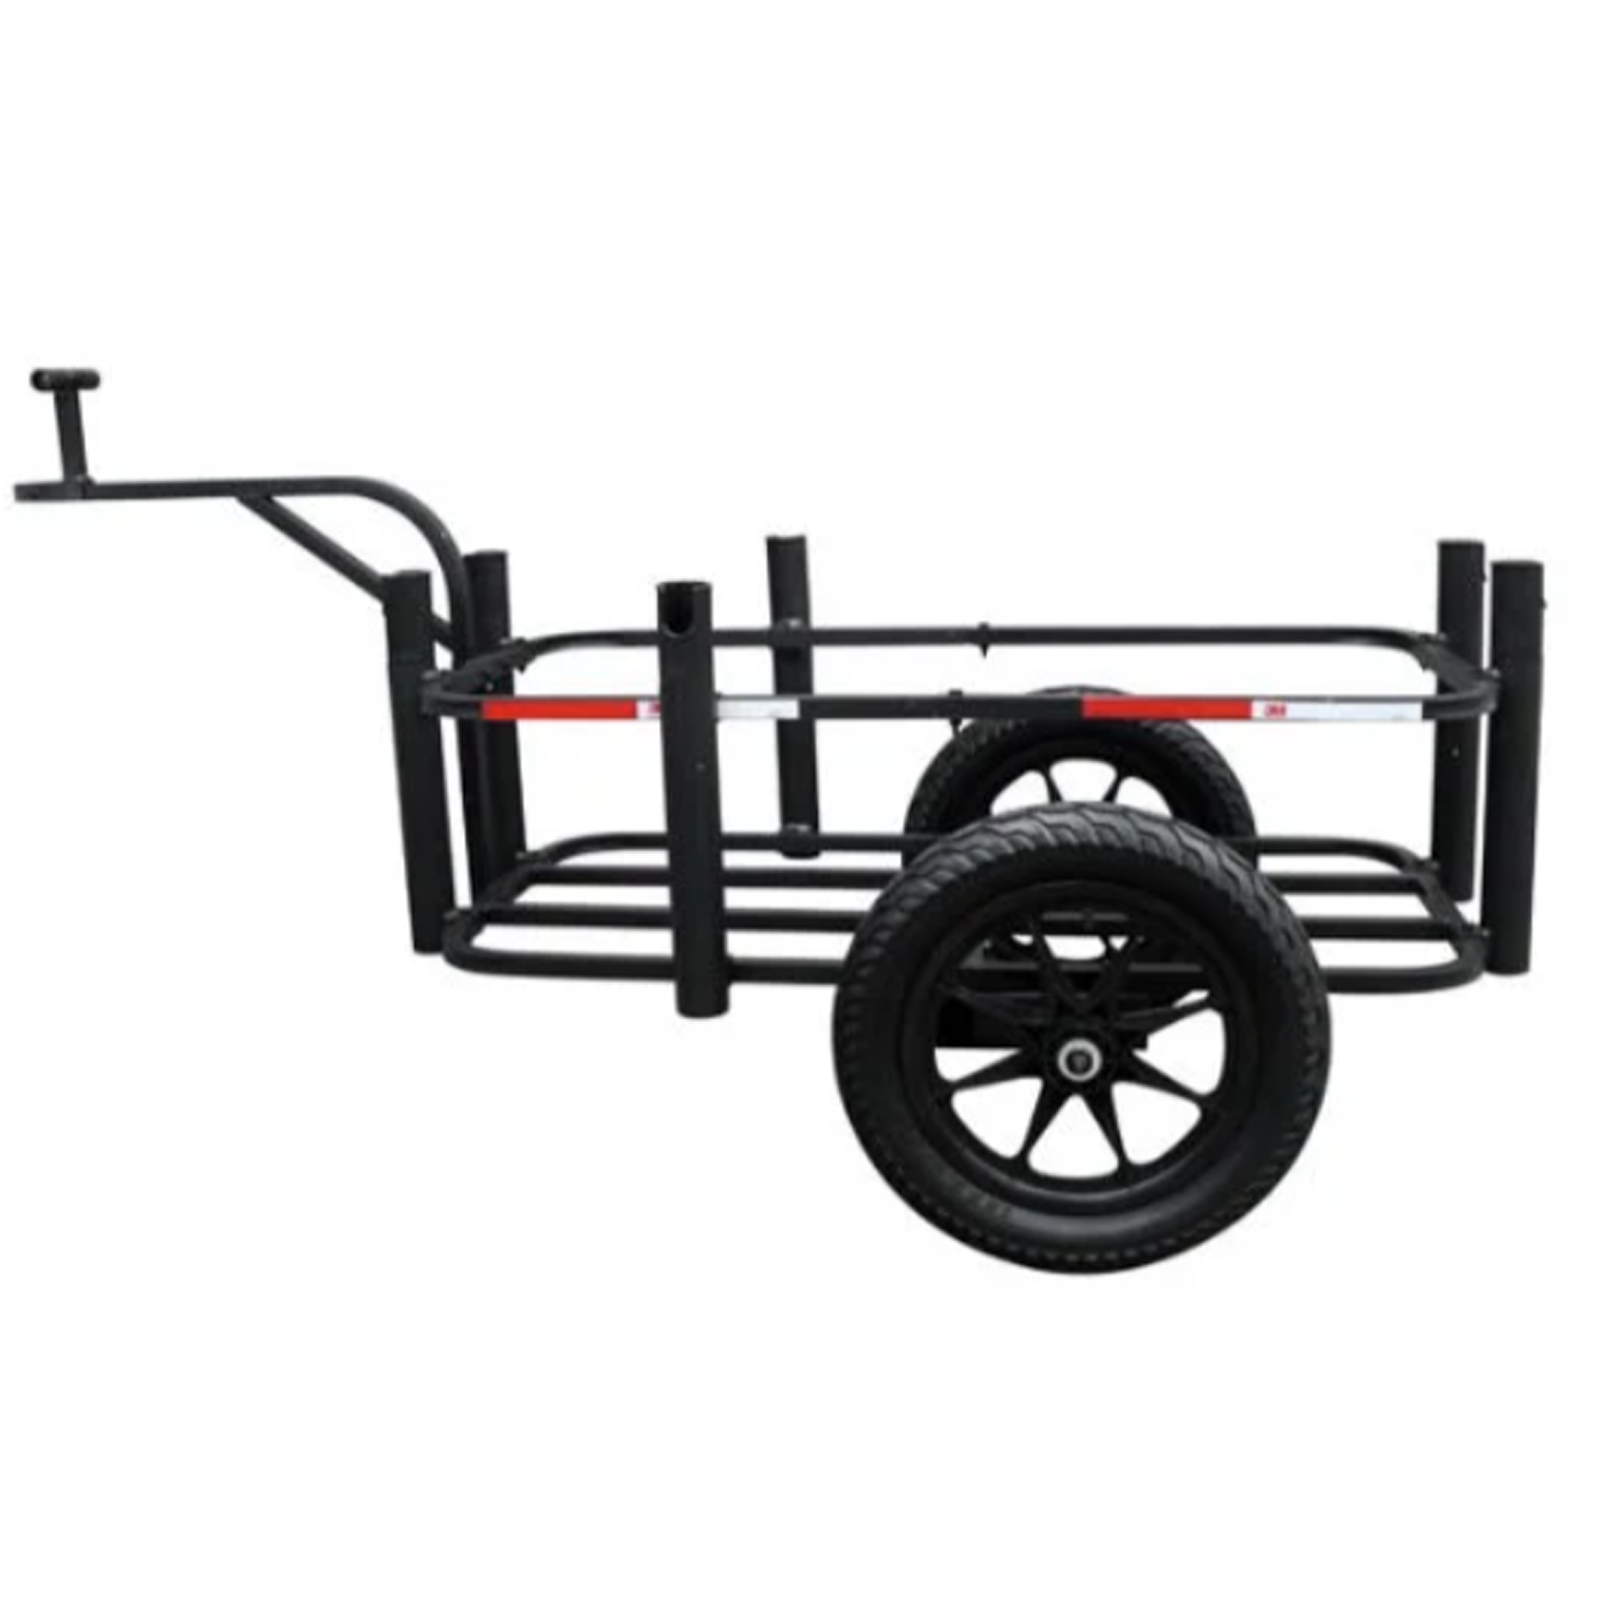 https://static.upnorthsports.com/Image/catimages/aluminumbikecart-1600.png